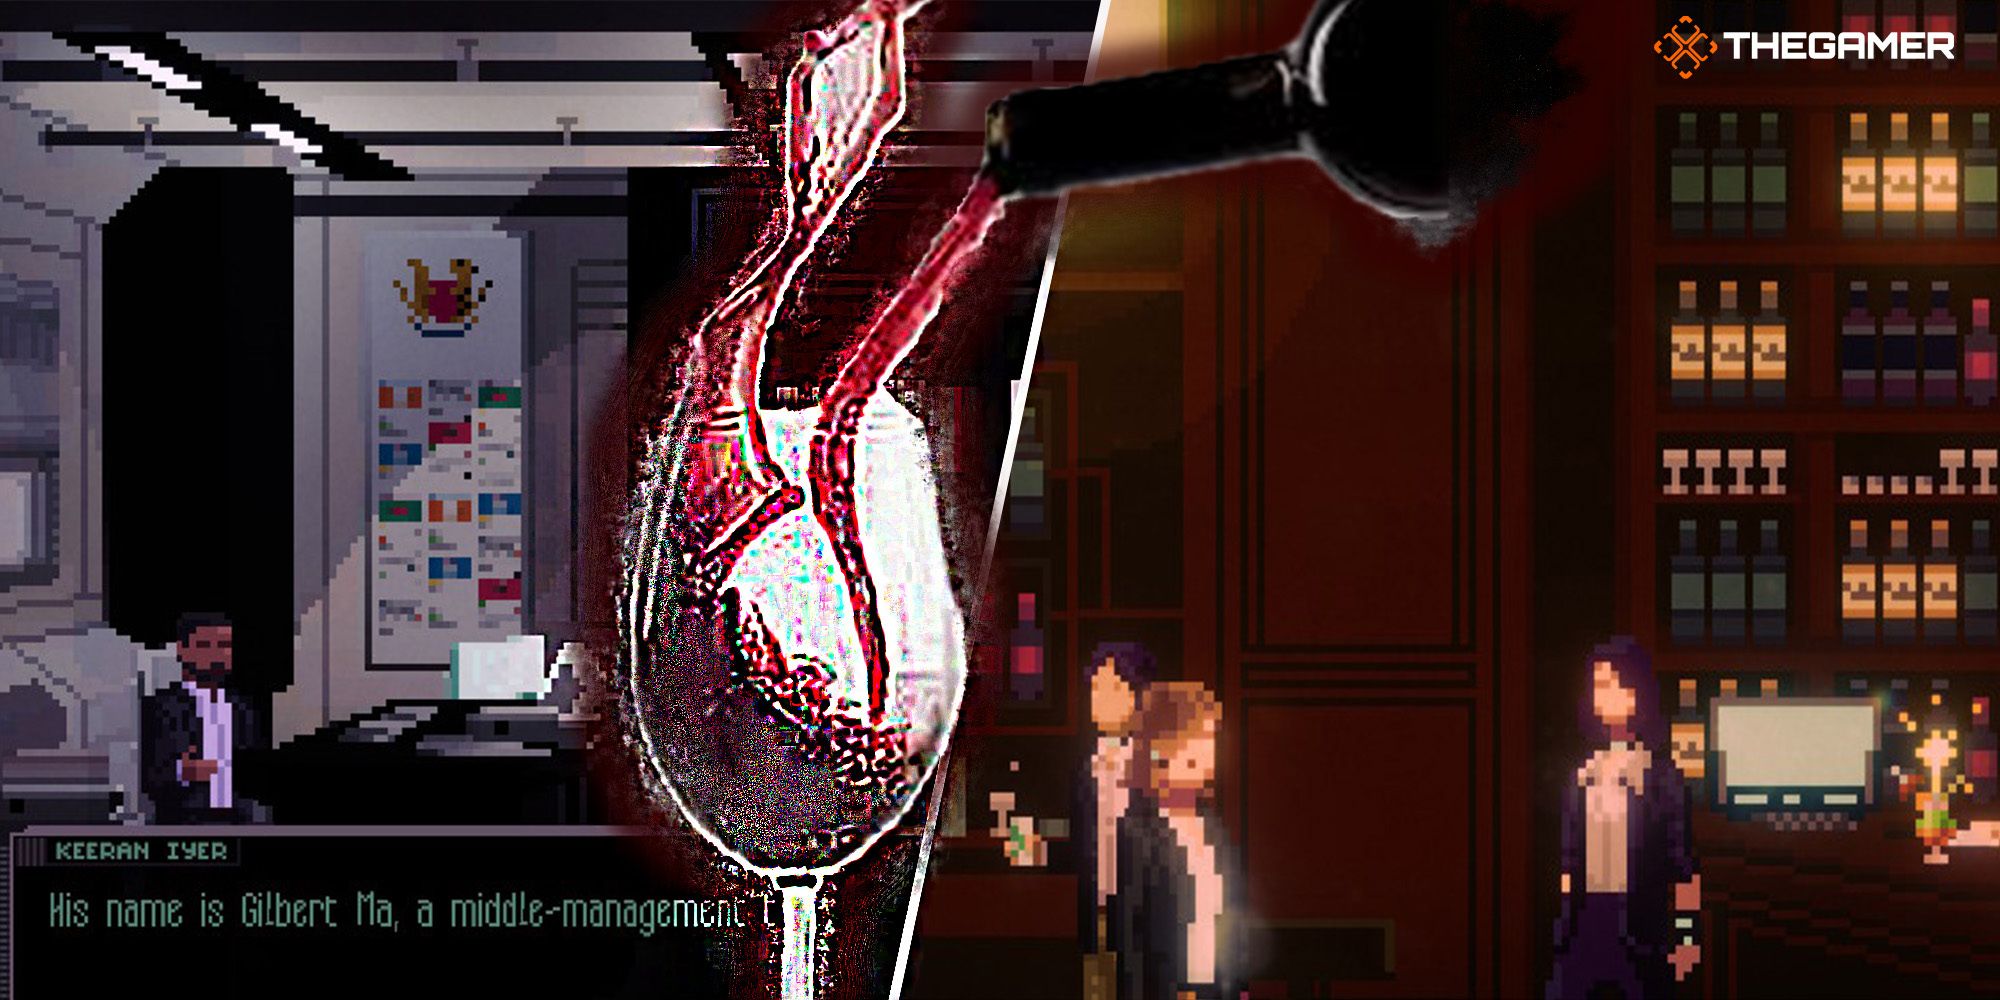 [Panel 1] Keeran Iyer briefs Amira in his office about her mission to bribe Gilbert Ma. [Panel 2] Amira has a heated exchange with Laetitia at Wine Haus. [Foreground] A pixelated bottle of wine pouring into a glass. Custom image for Chinatown Detective Agency.